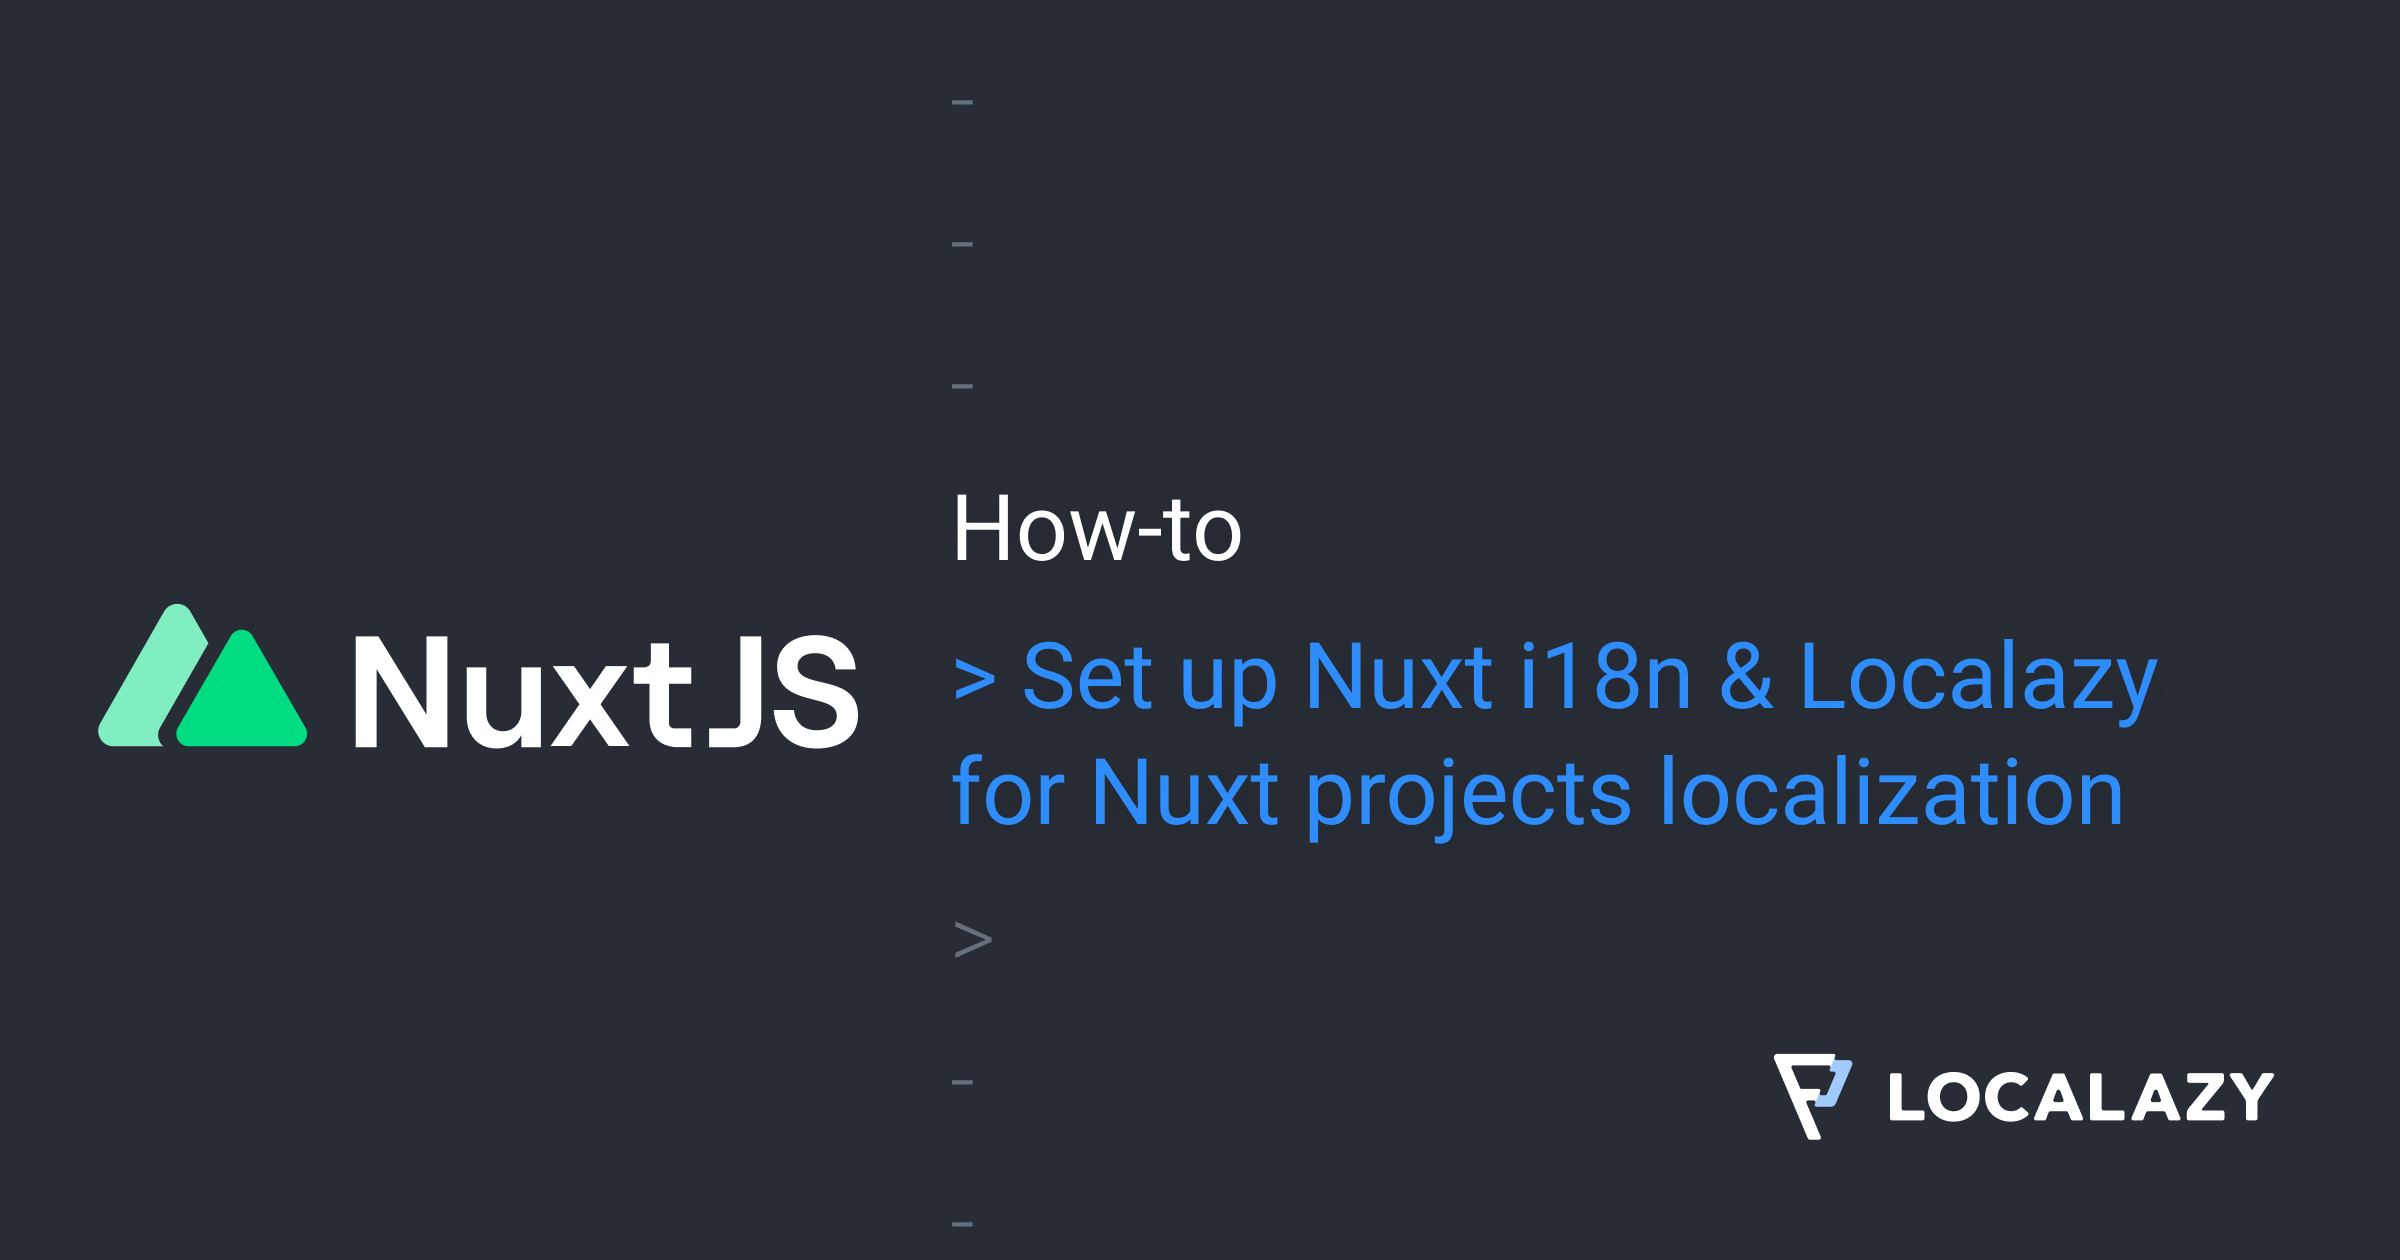 How to use Nuxt i18n & Localazy for Nuxt projects localization